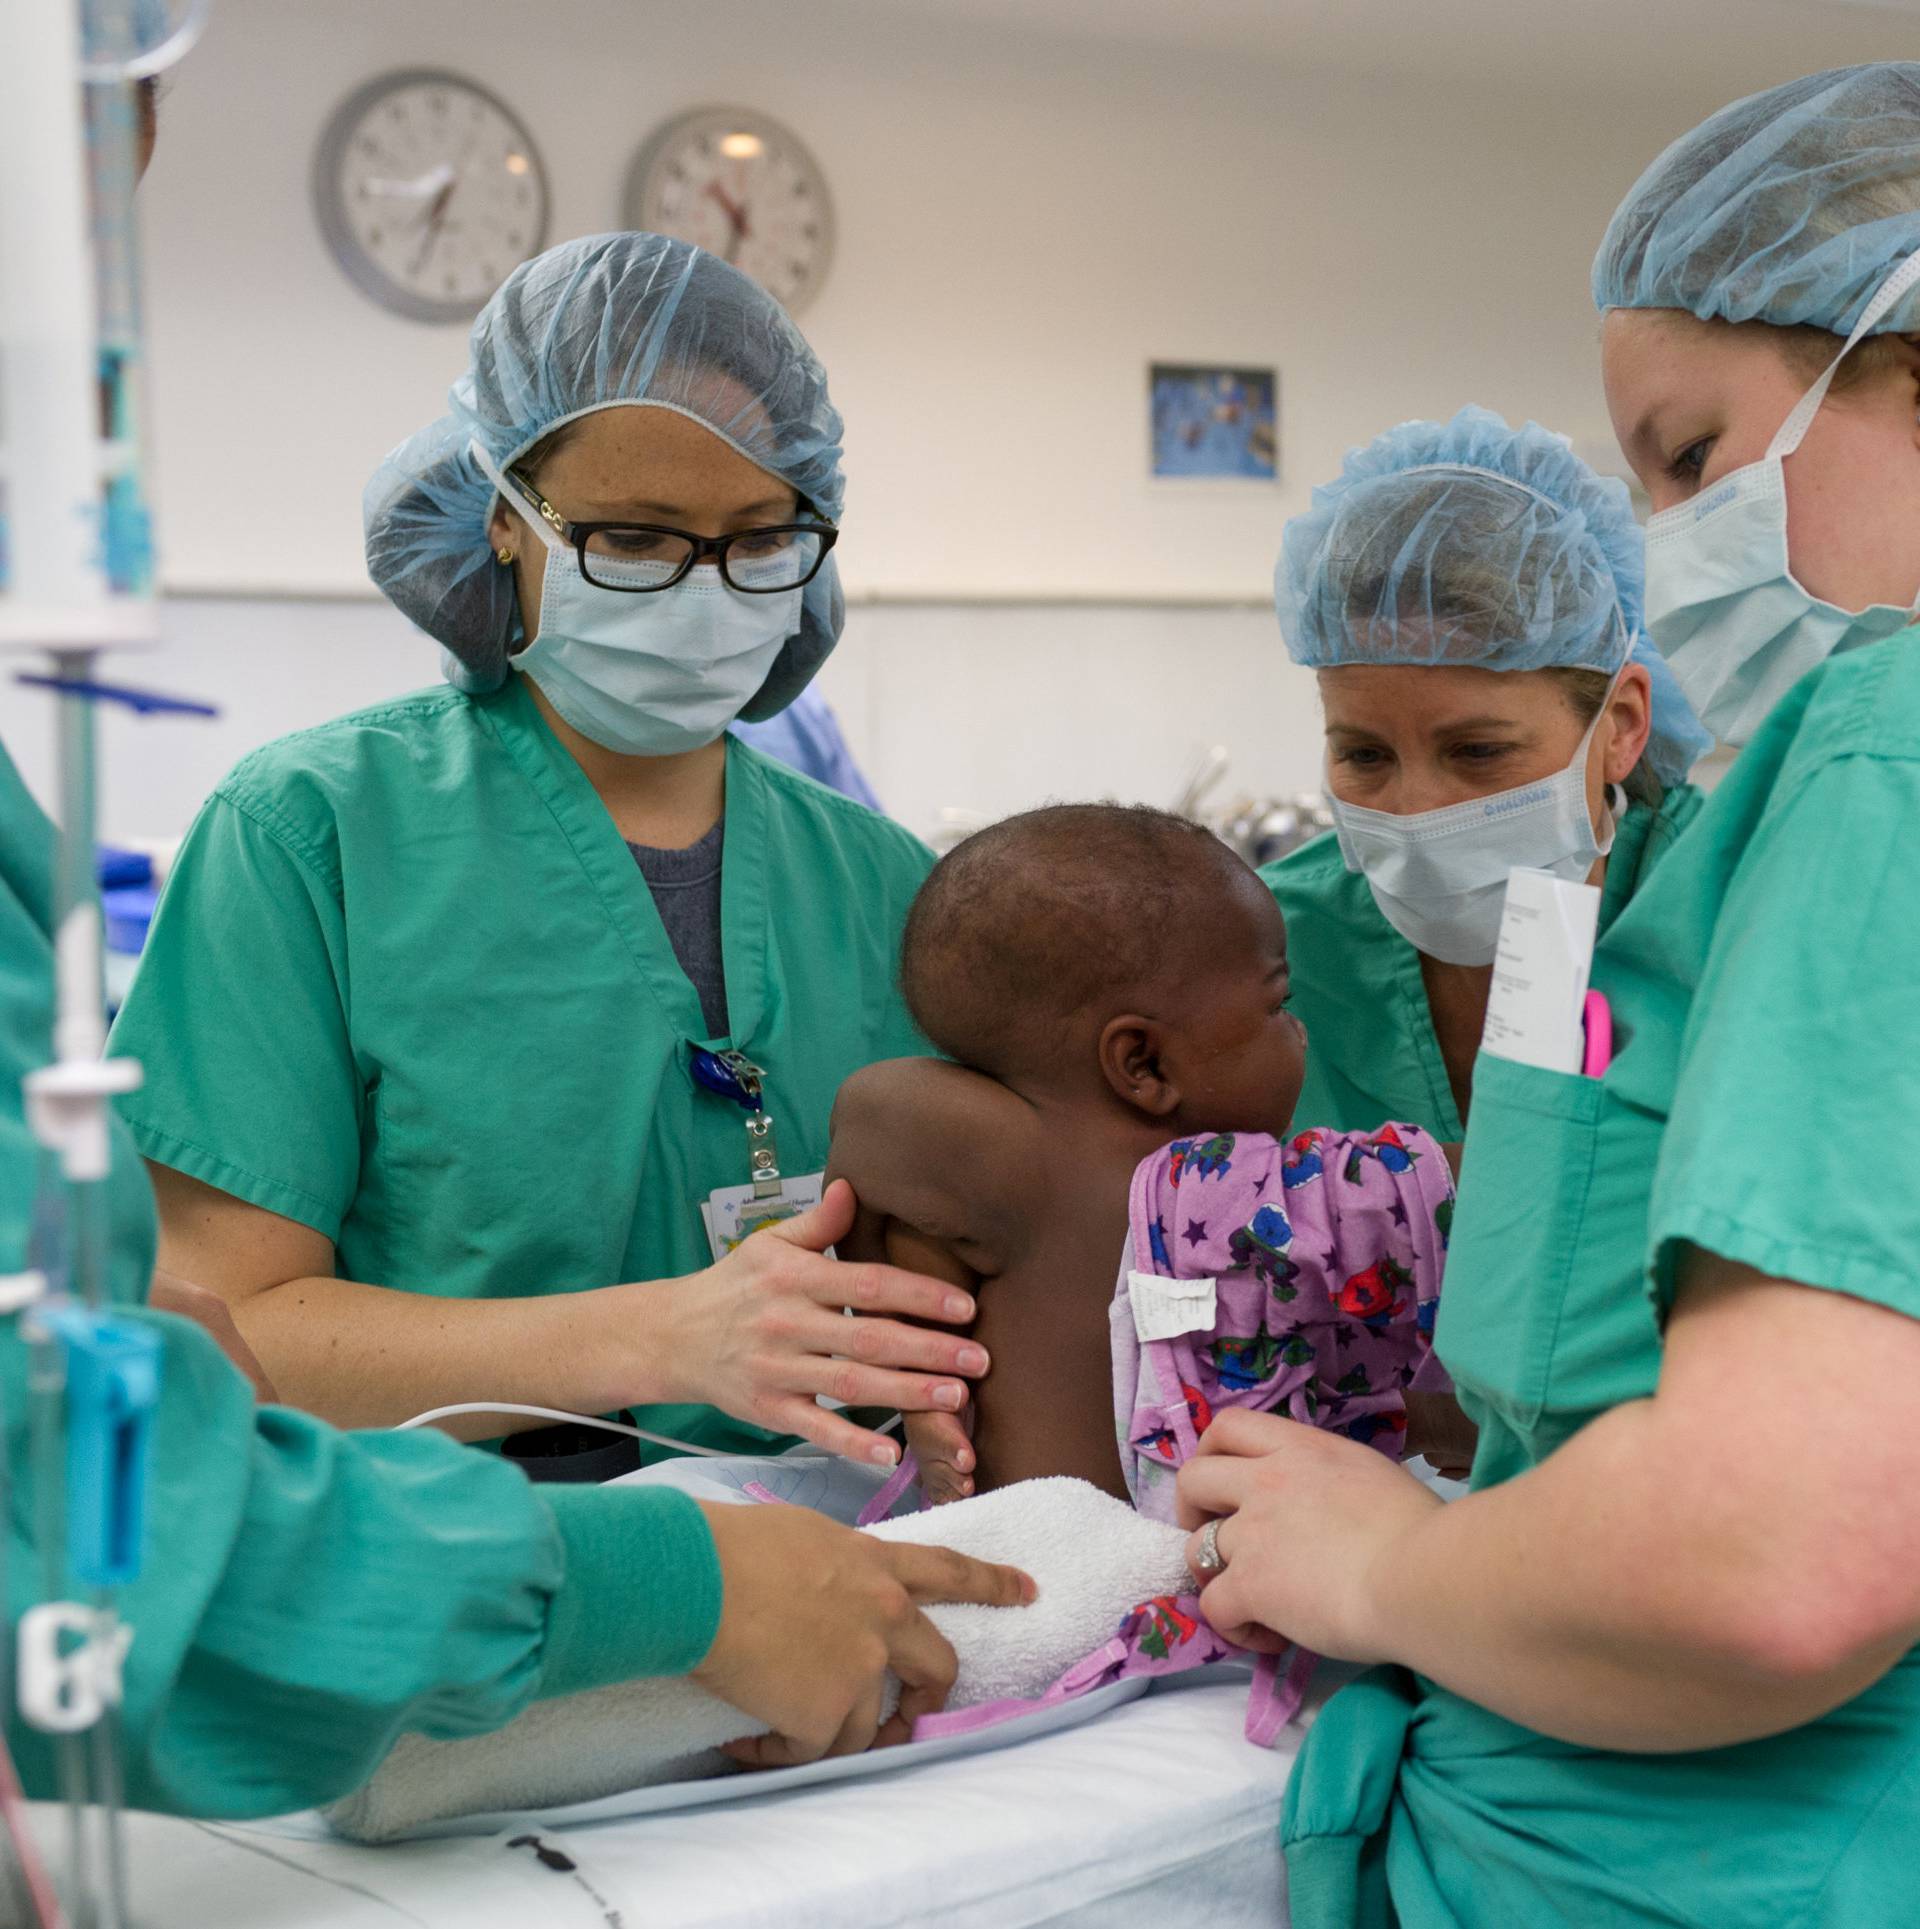 Hospital staff prepare 10-month old "Baby Dominique" for surgery to treat the infant born with four legs and two spines at Advocate Children's Hospital in Park Ridge, Illinois